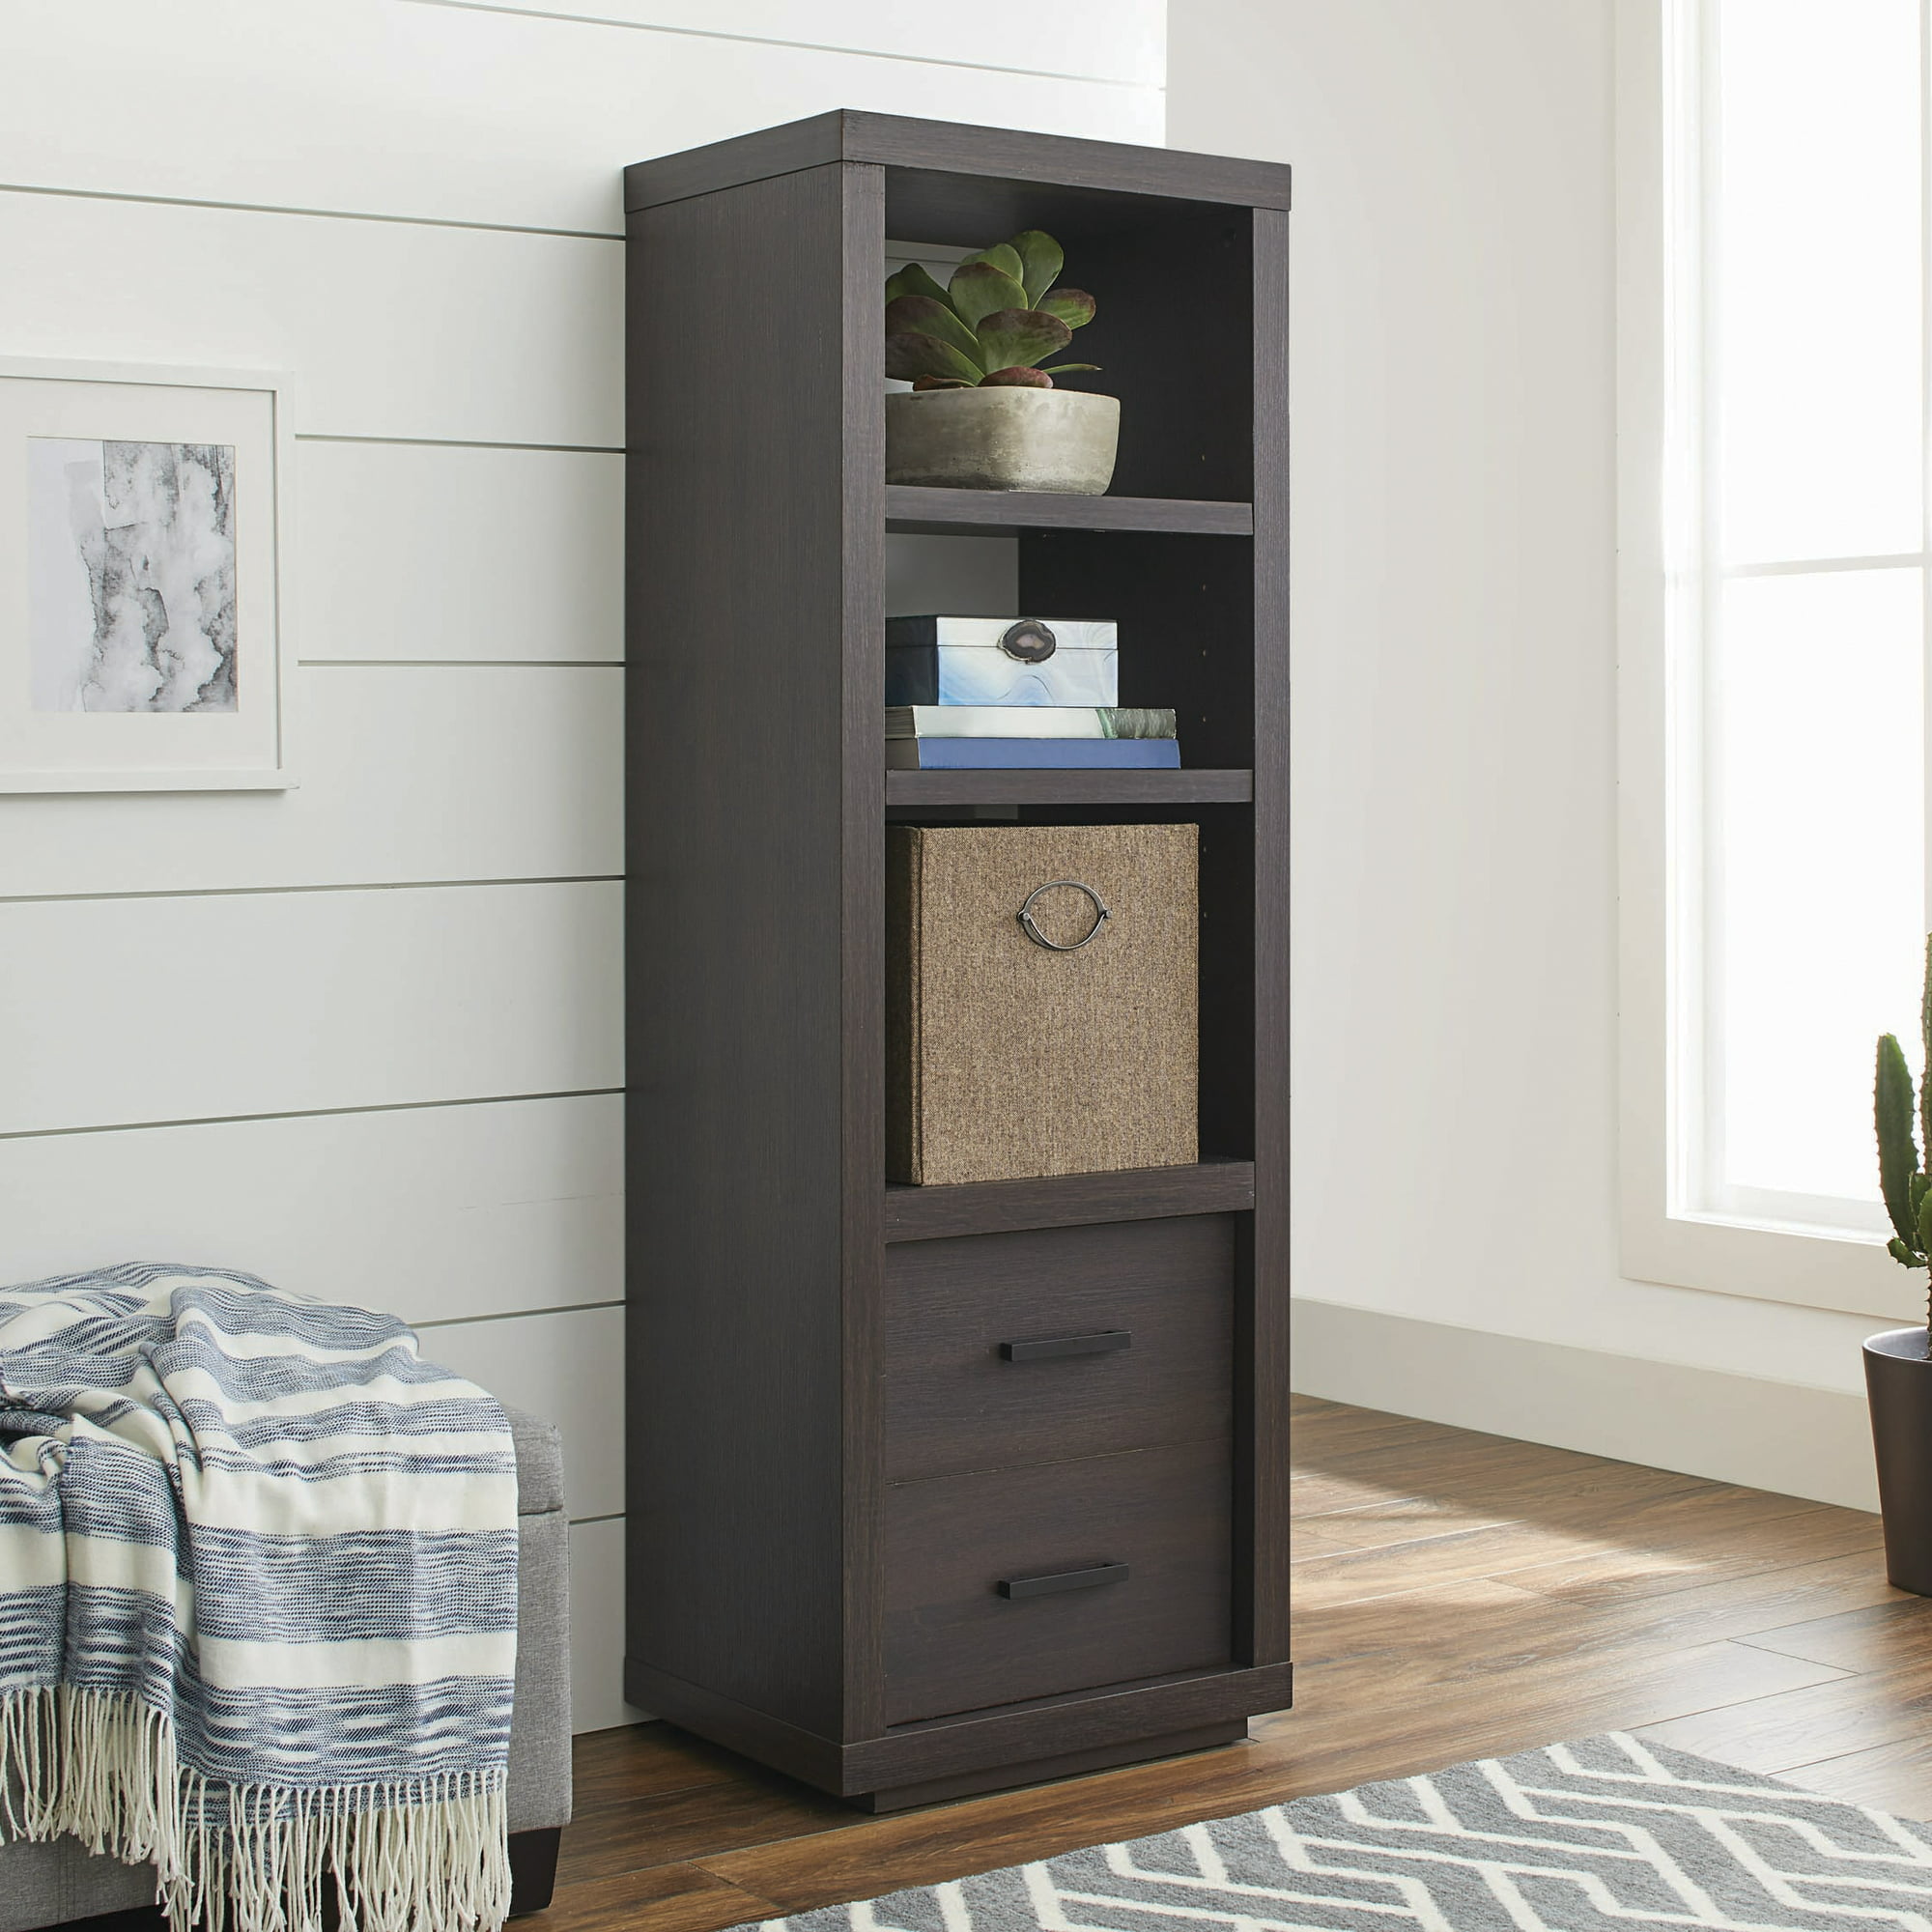 60" Better Homes & Gardens Steele Storage Bookcase $65 + Free Shipping